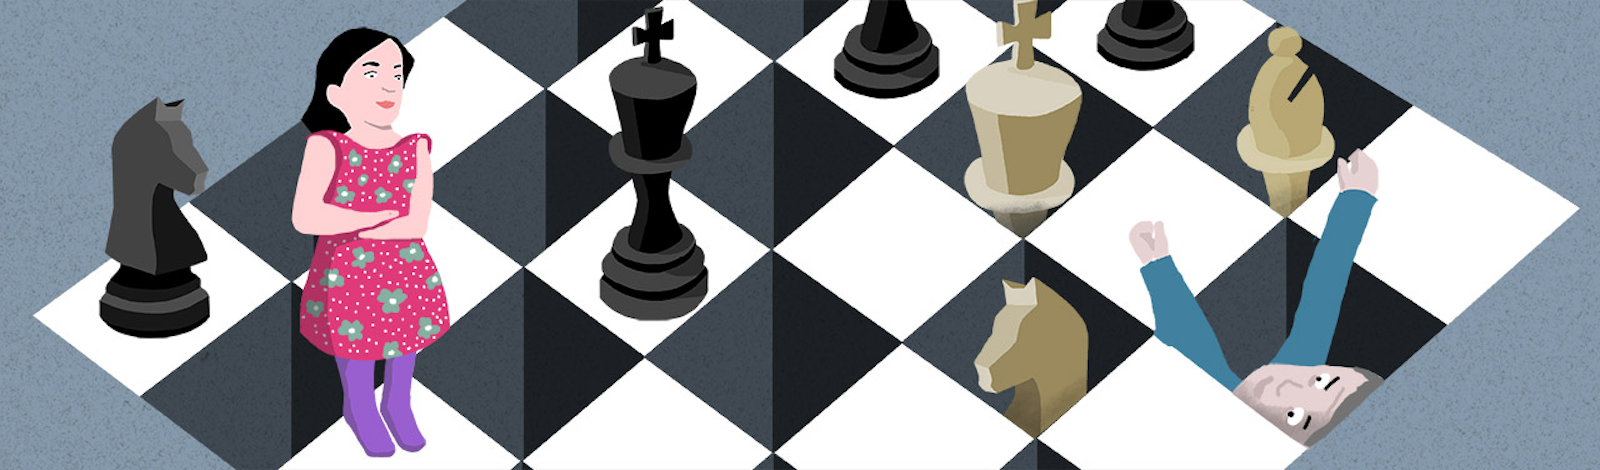 Online chess opening traps: Know before it's too late!